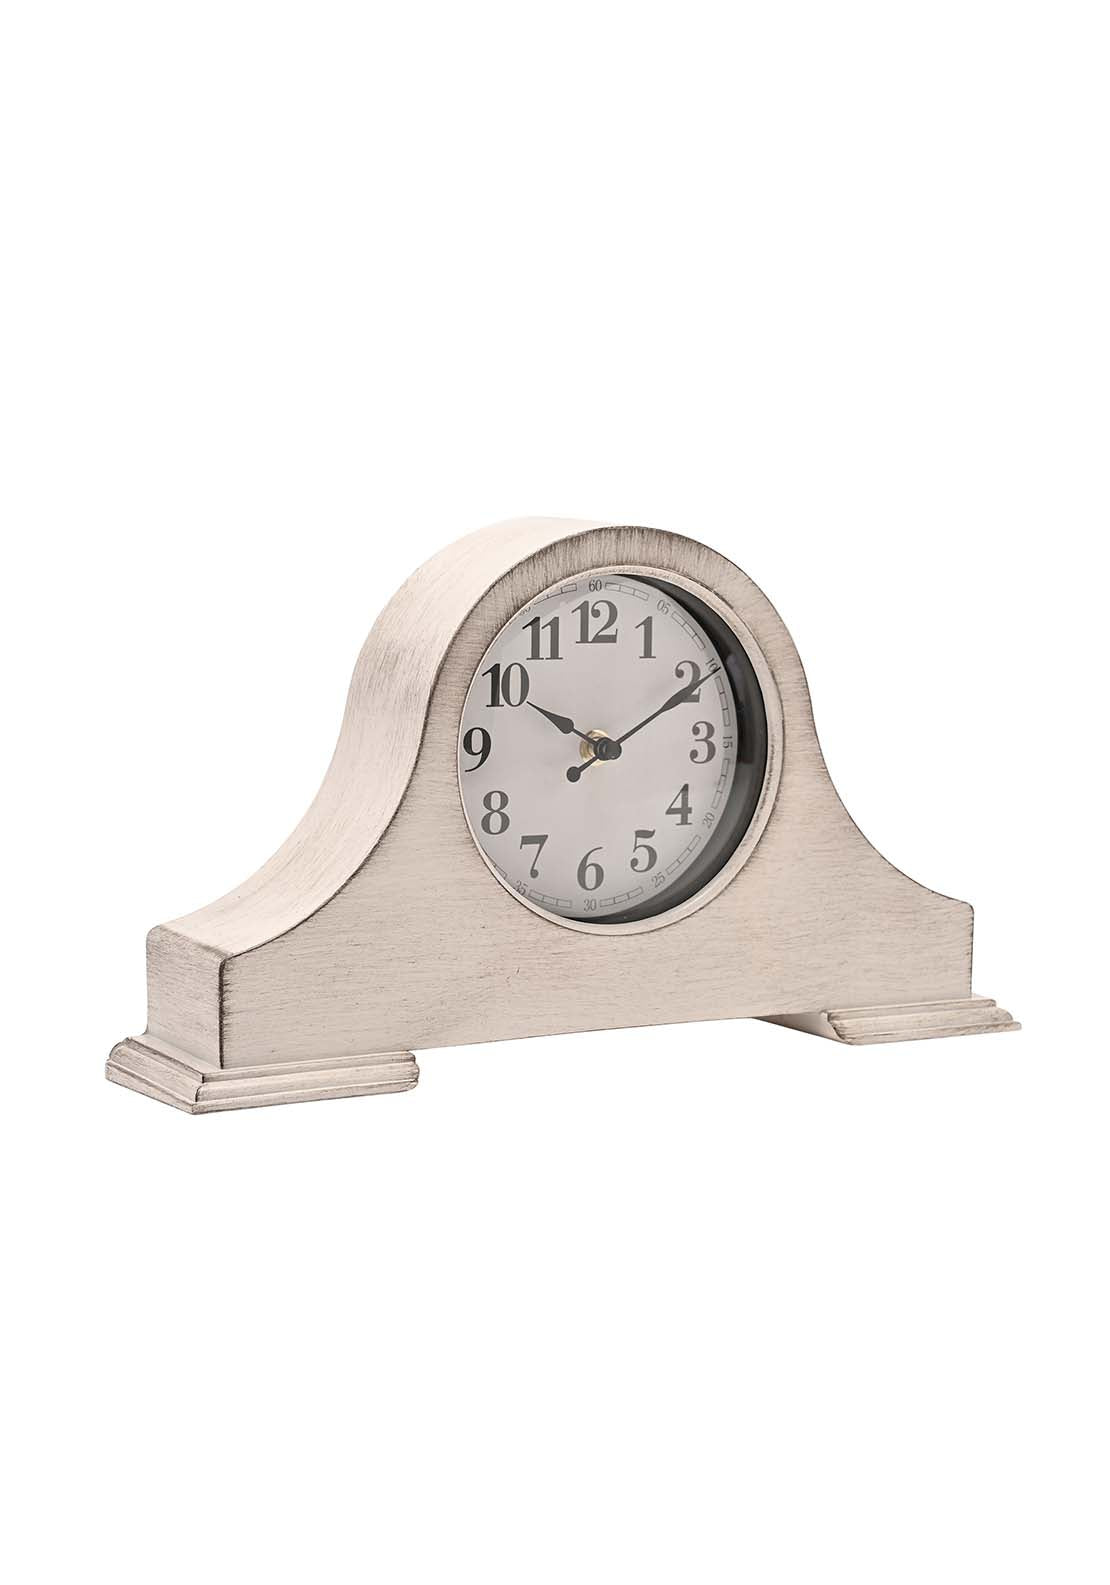 The Home Collection Hometime Mantel Clock 36cm - White 2 Shaws Department Stores